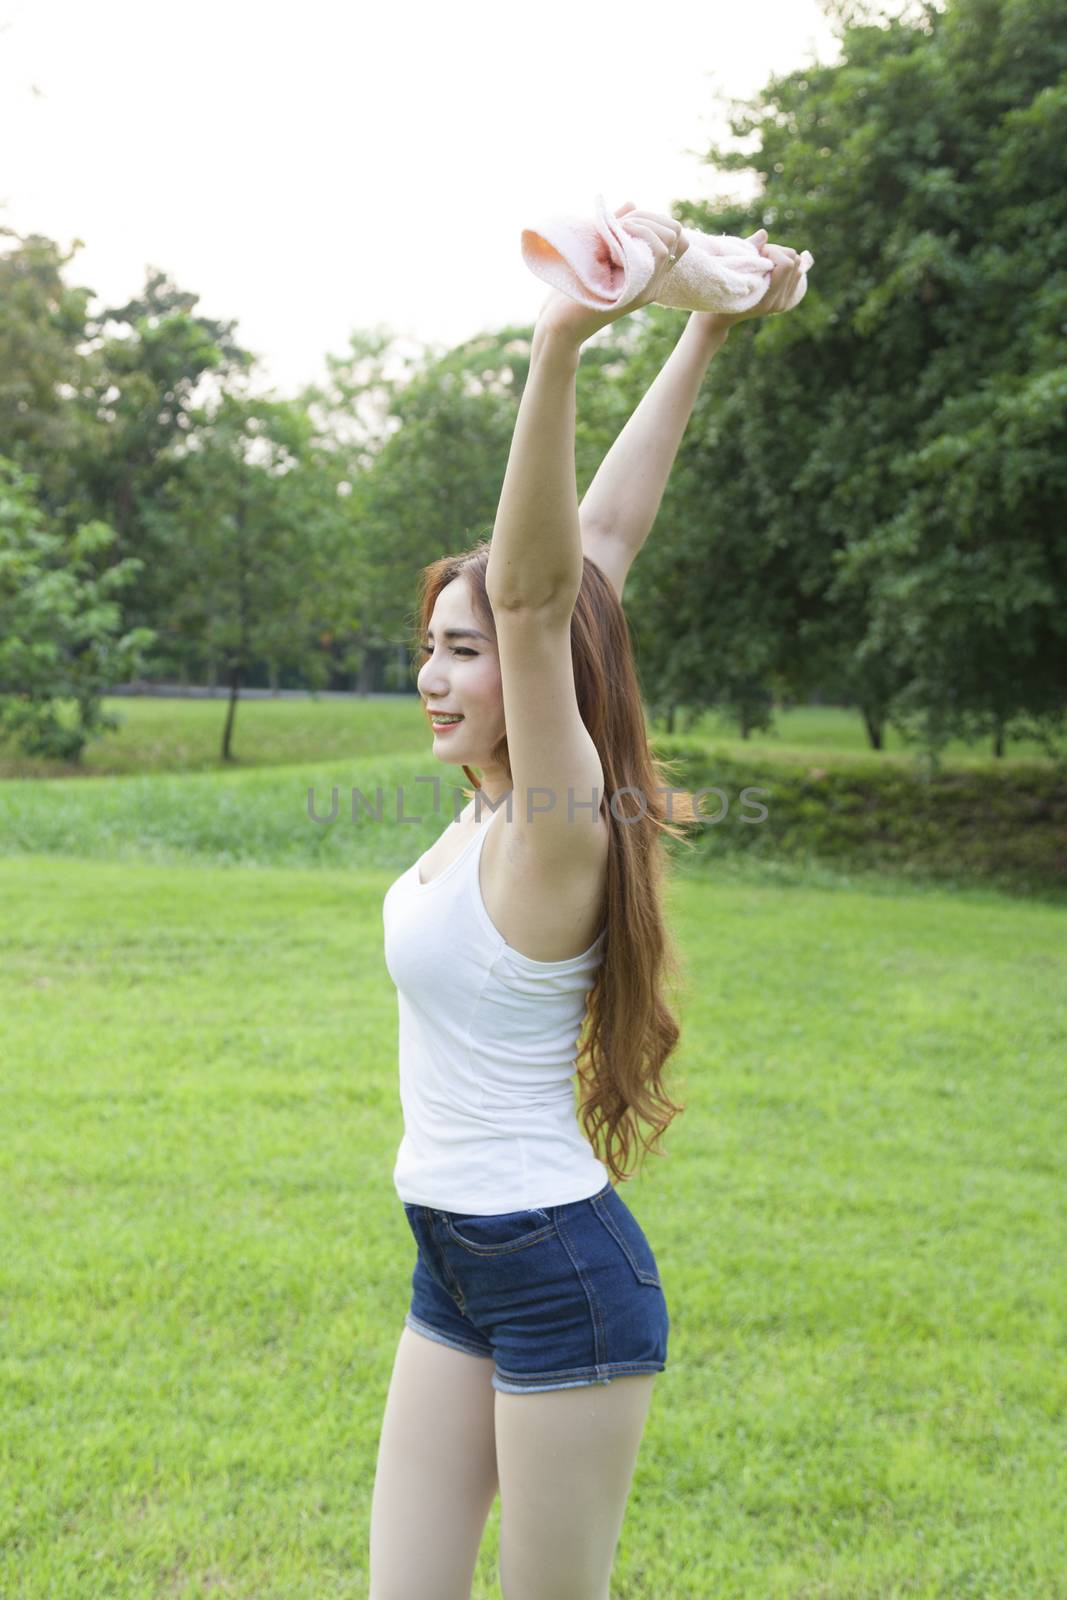 Woman warming up before exercise. on grass Within the park in the evening